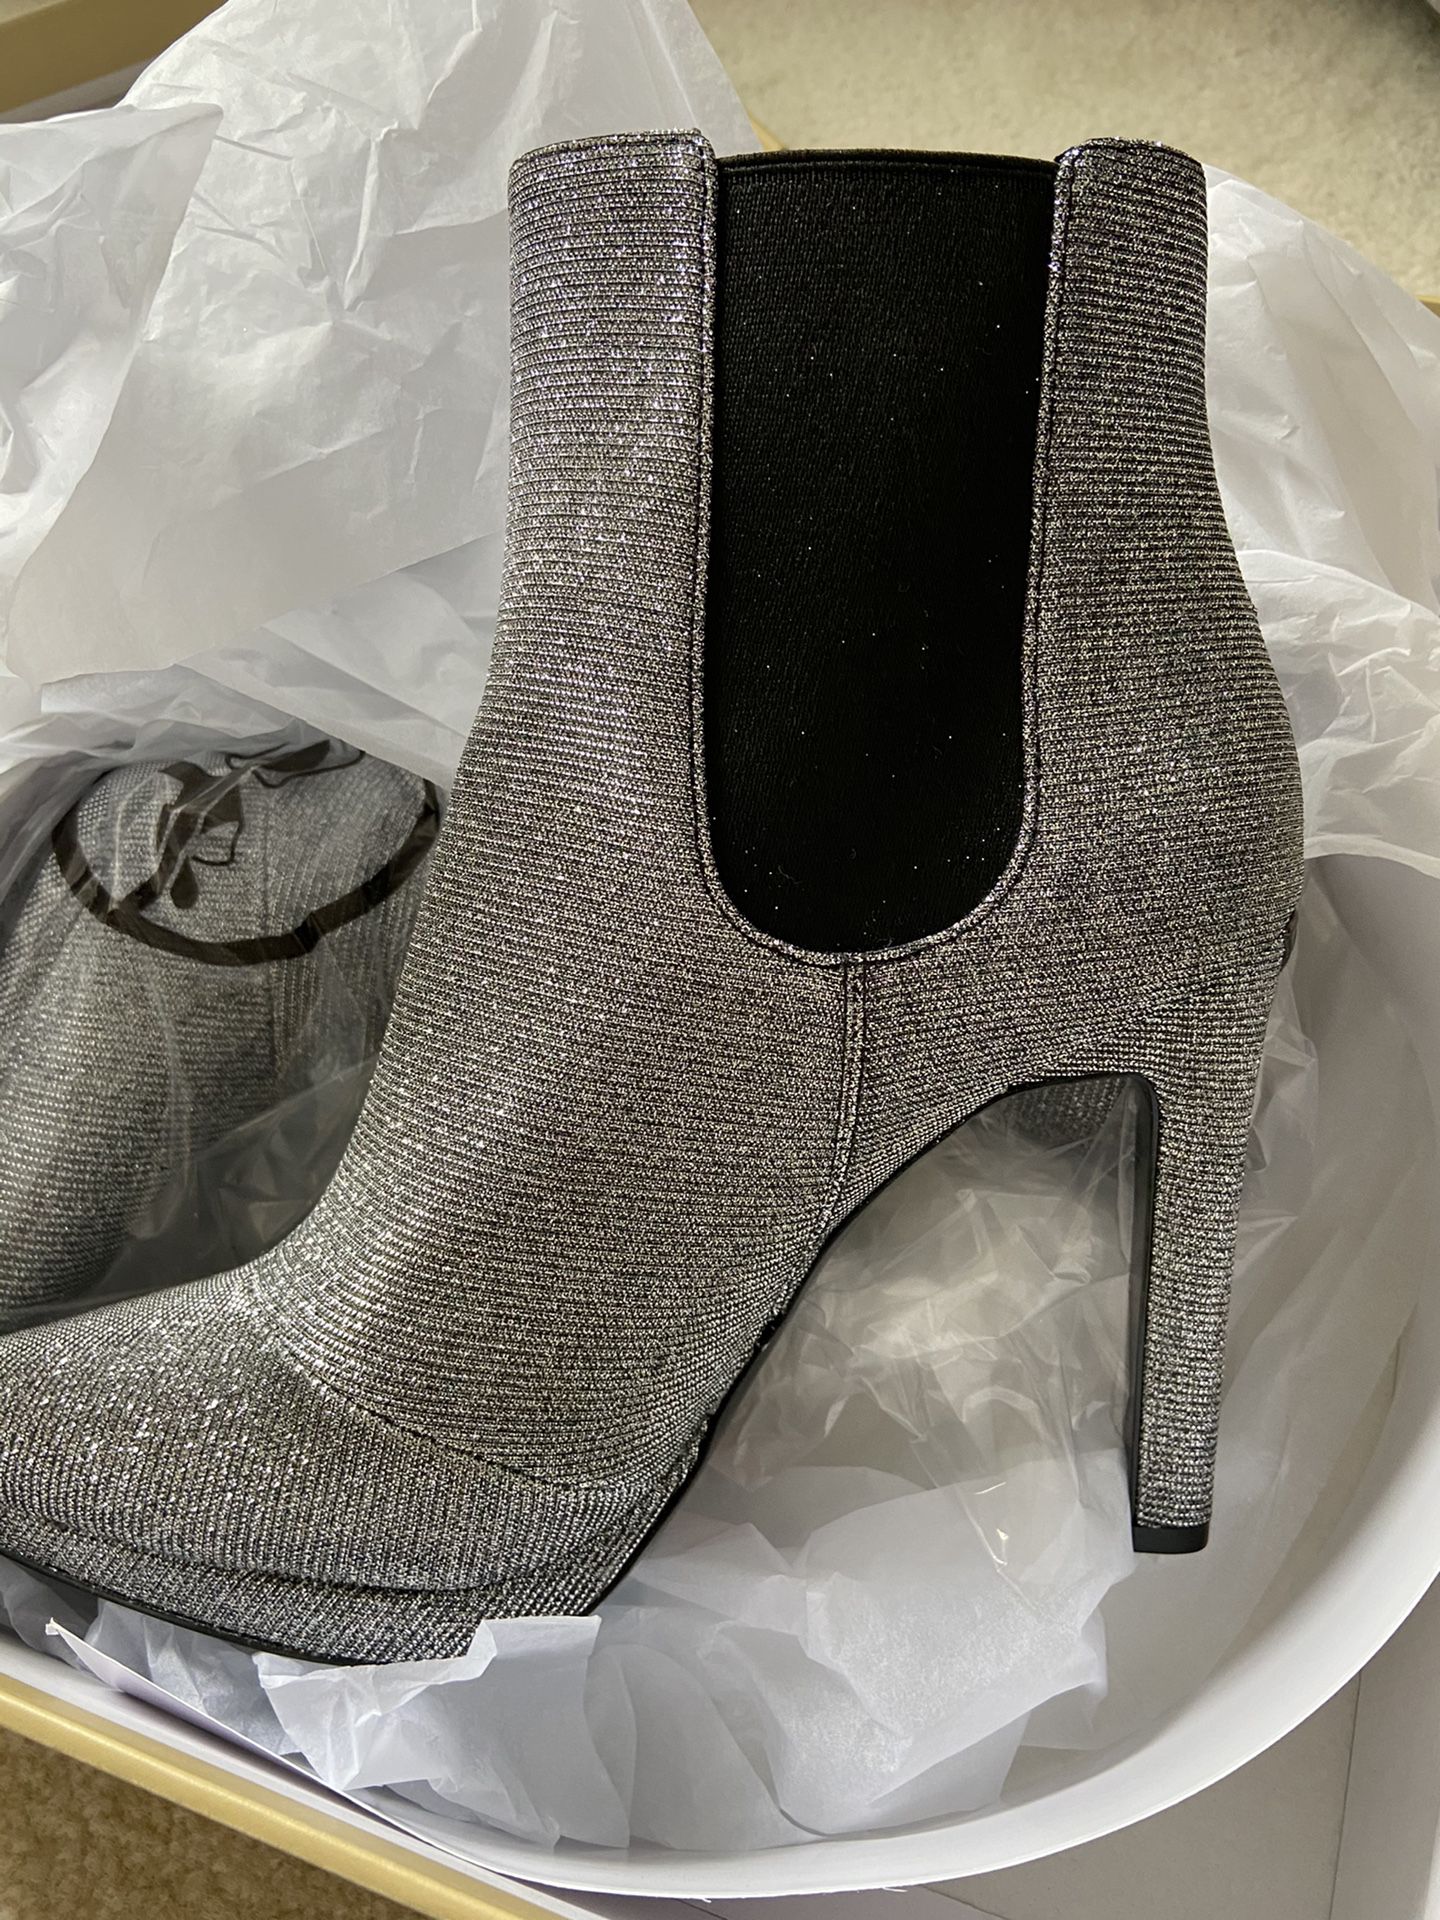 Michael Kors Brielle Bootie (Brand new/still in the box) SIZE 8